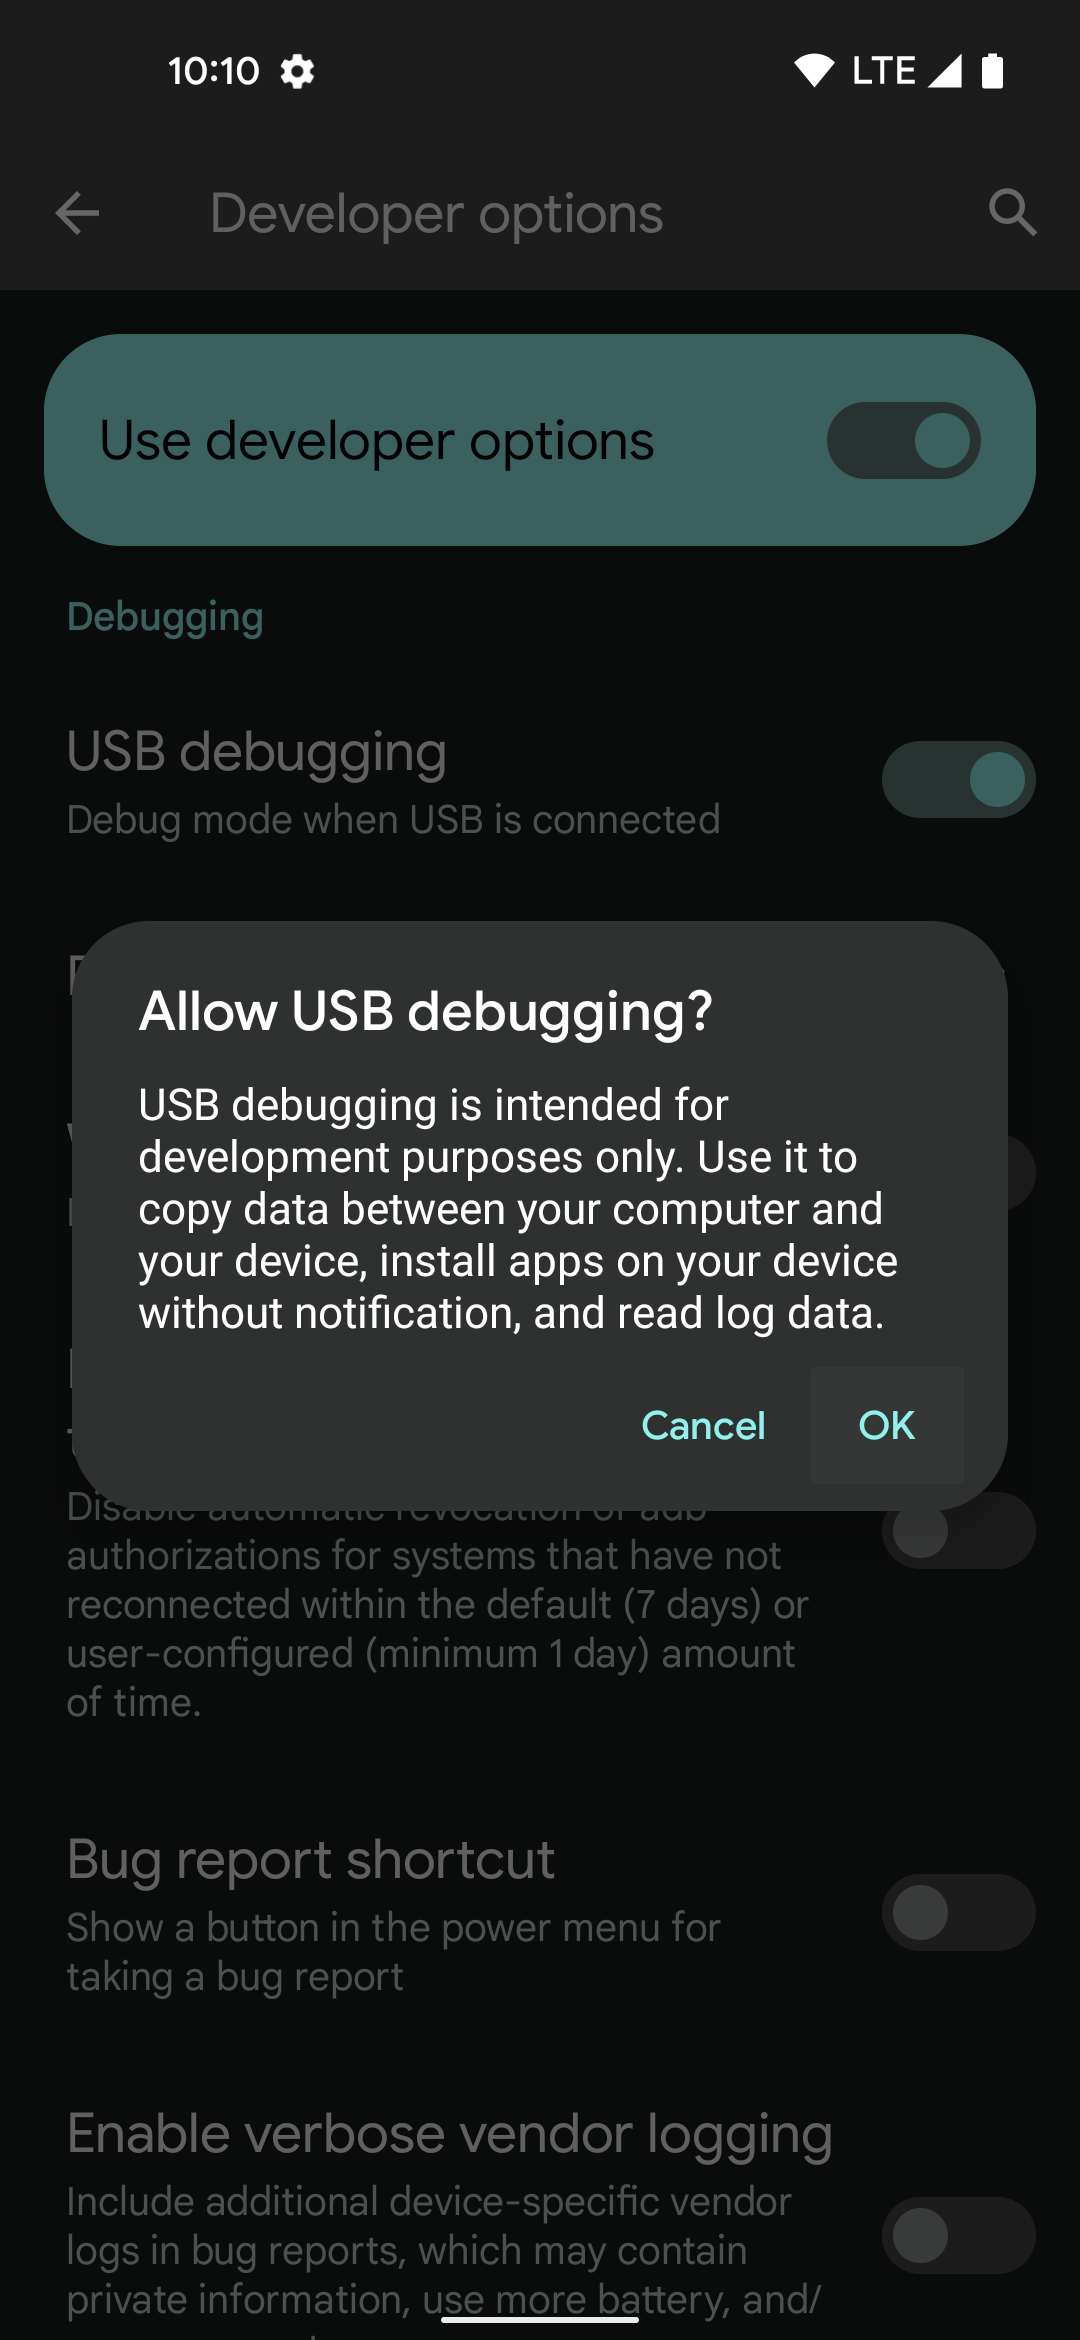 Turning on the "USB debugging" feature in the developer options menu.